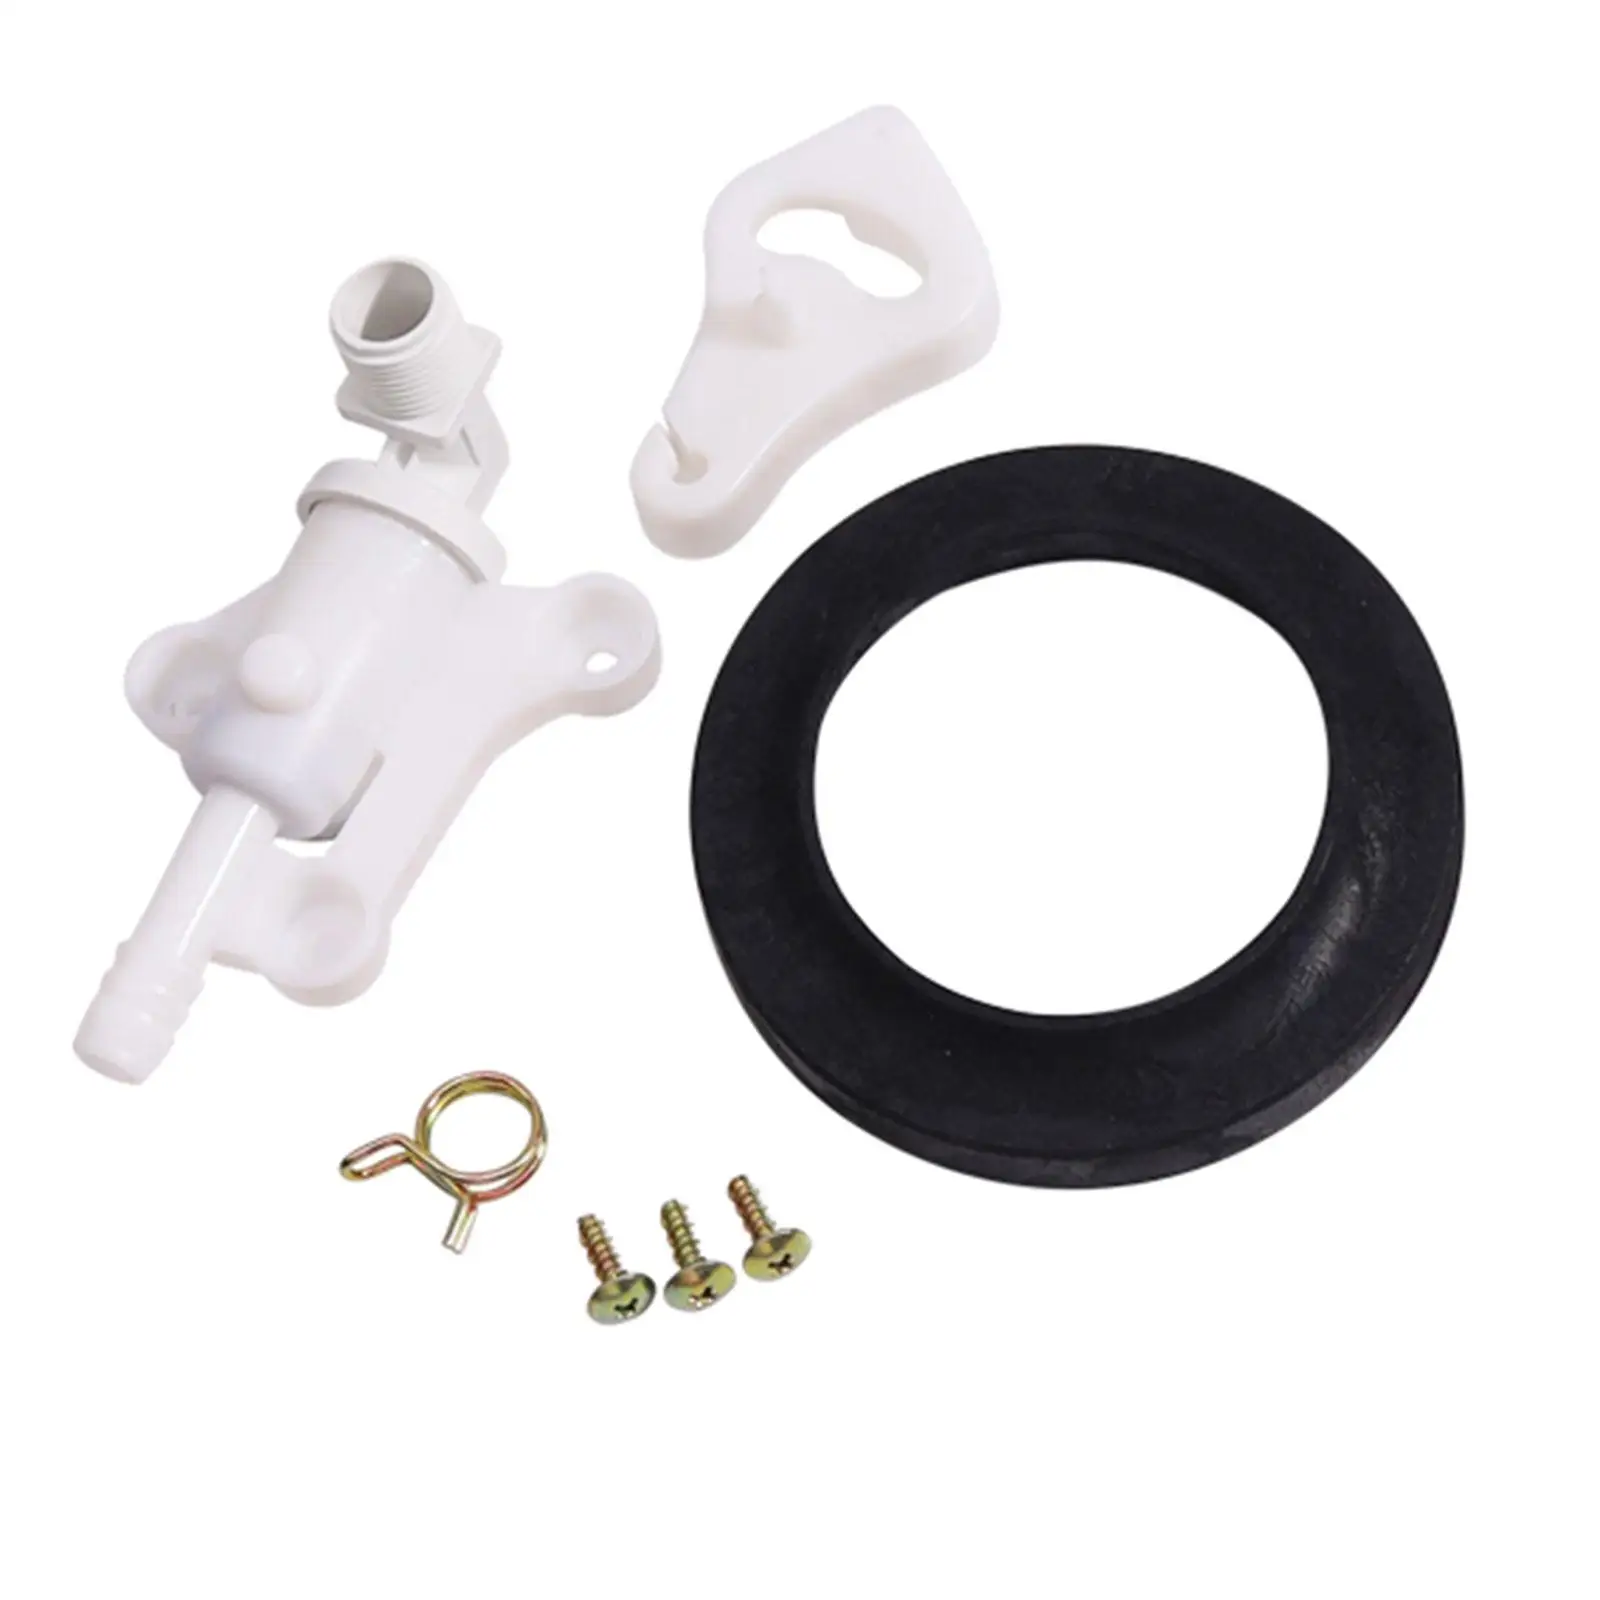 34100 Water Valve with Seal, RV Toilet Valve with RV ball Seal, Durable Replace